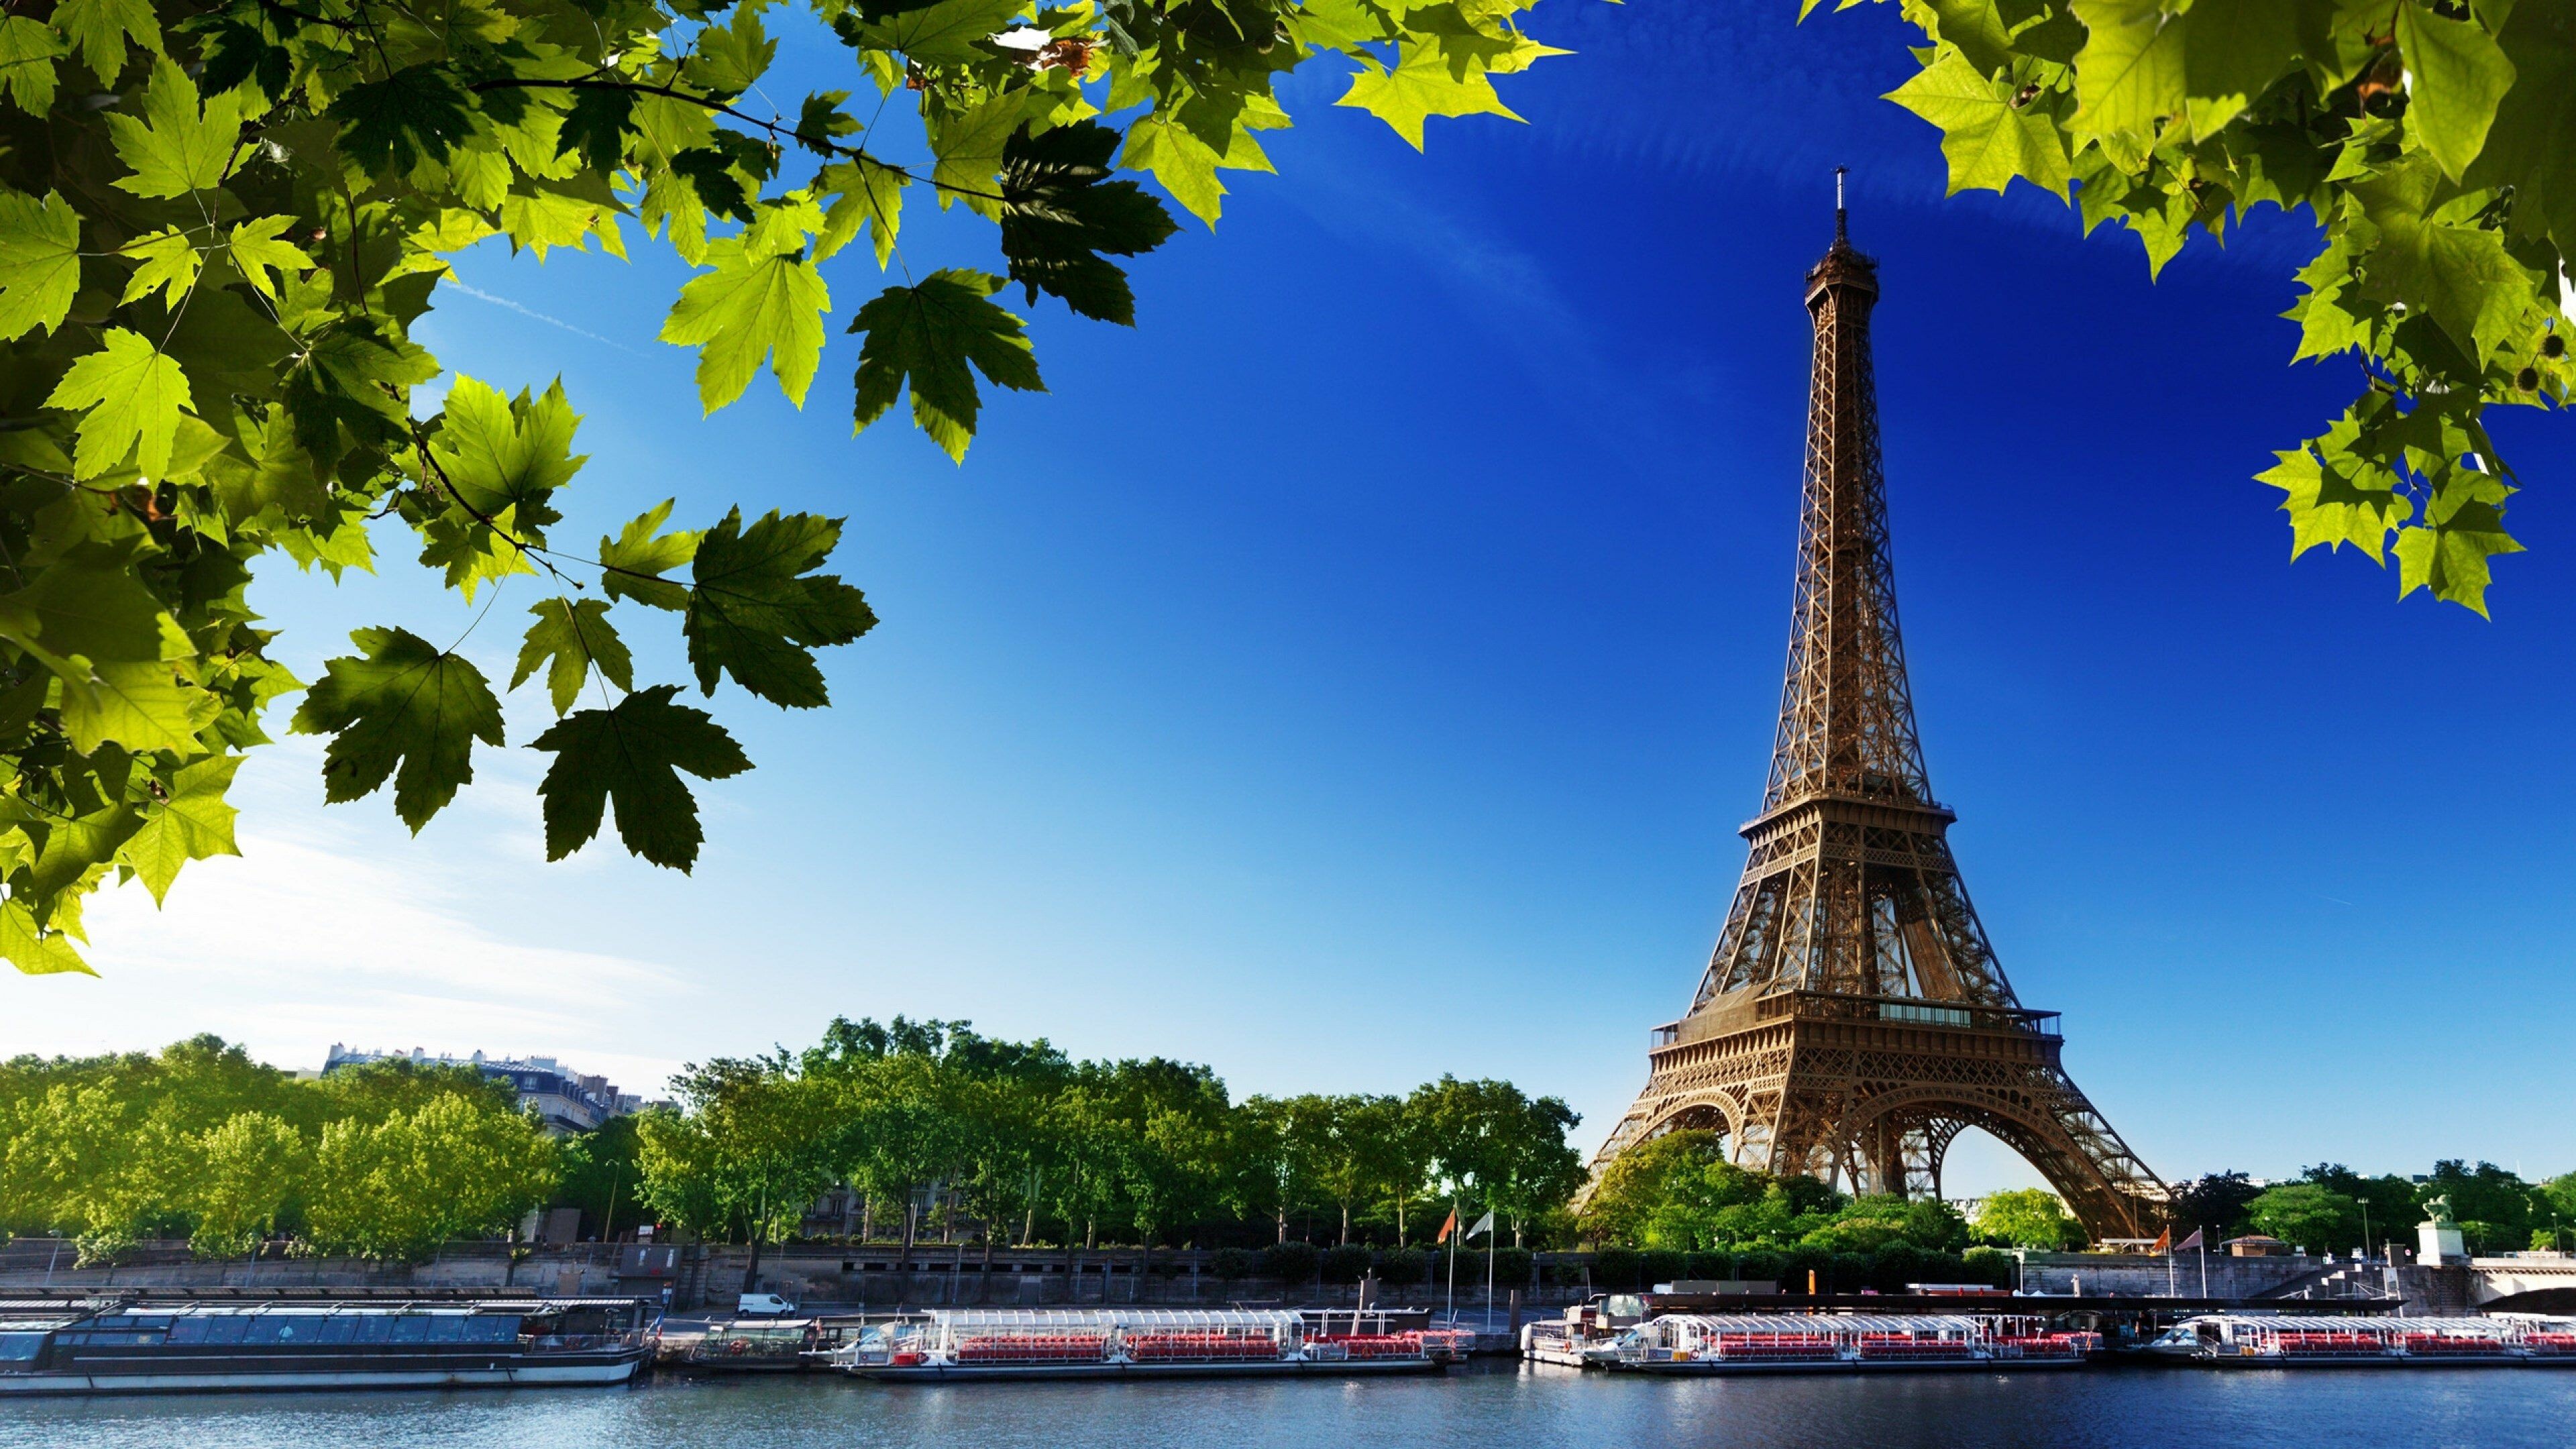 France: Paris, Eiffel Tower, The country's overseas territories include French Guiana in South America. 3840x2160 4K Wallpaper.